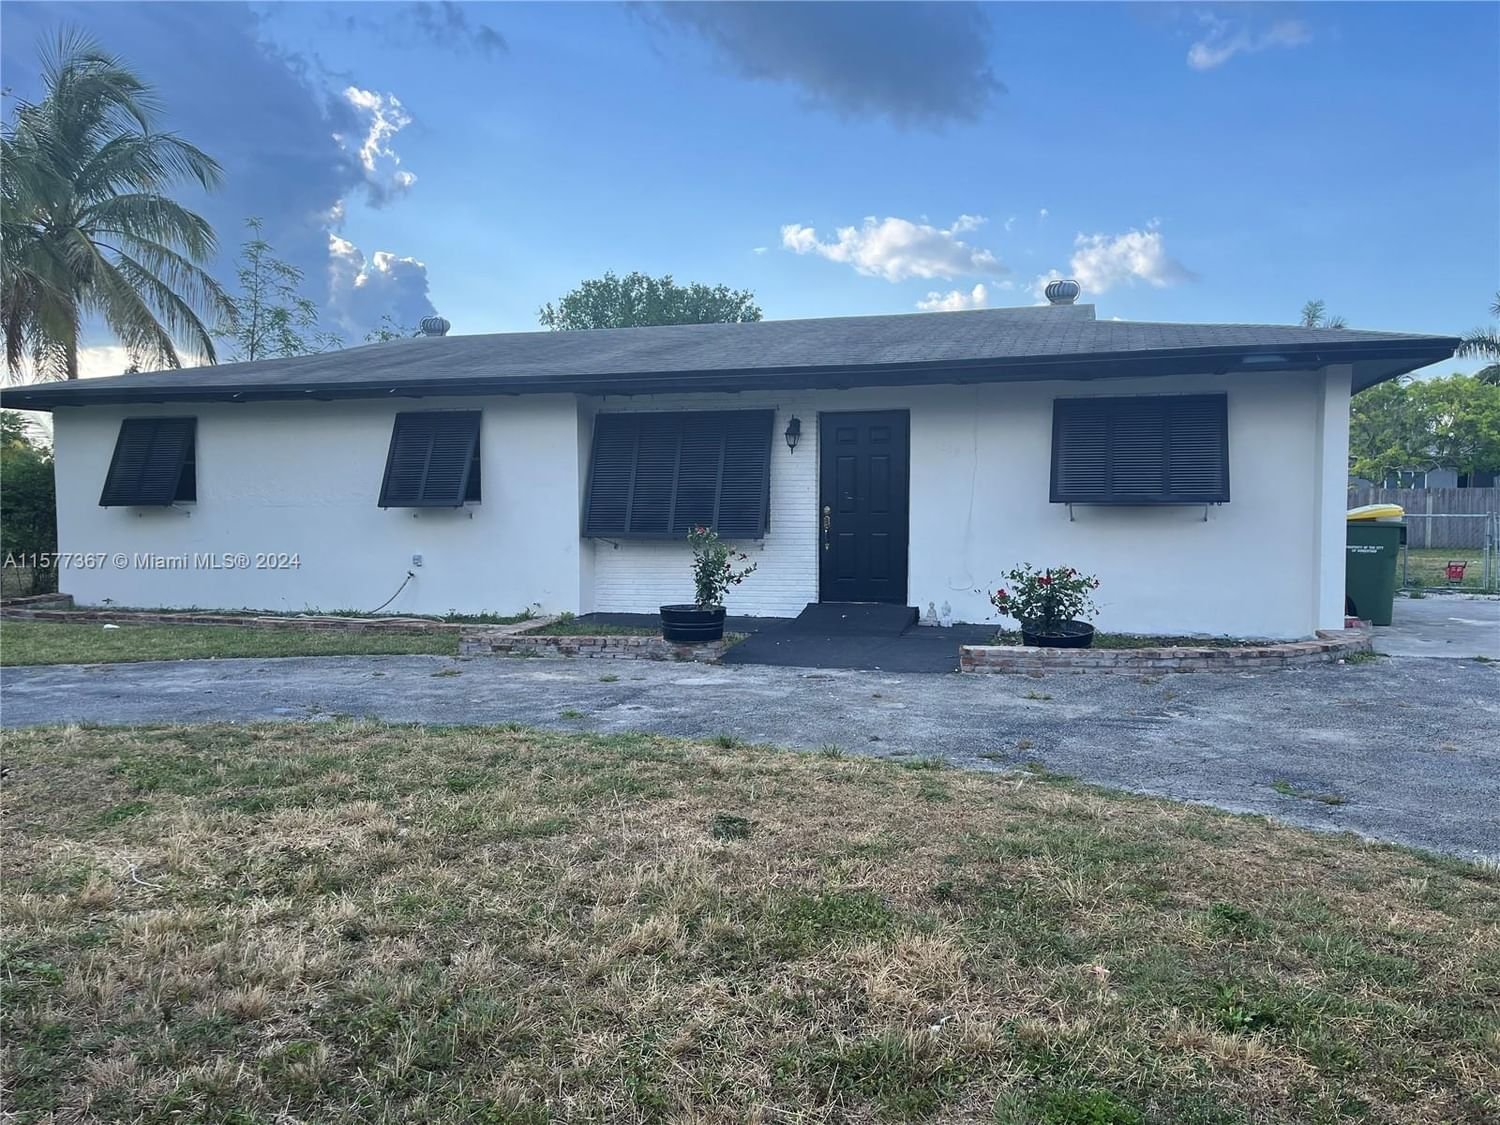 Real estate property located at 1165 15th St, Miami-Dade County, HOMRIV SUBDIVISION, Homestead, FL